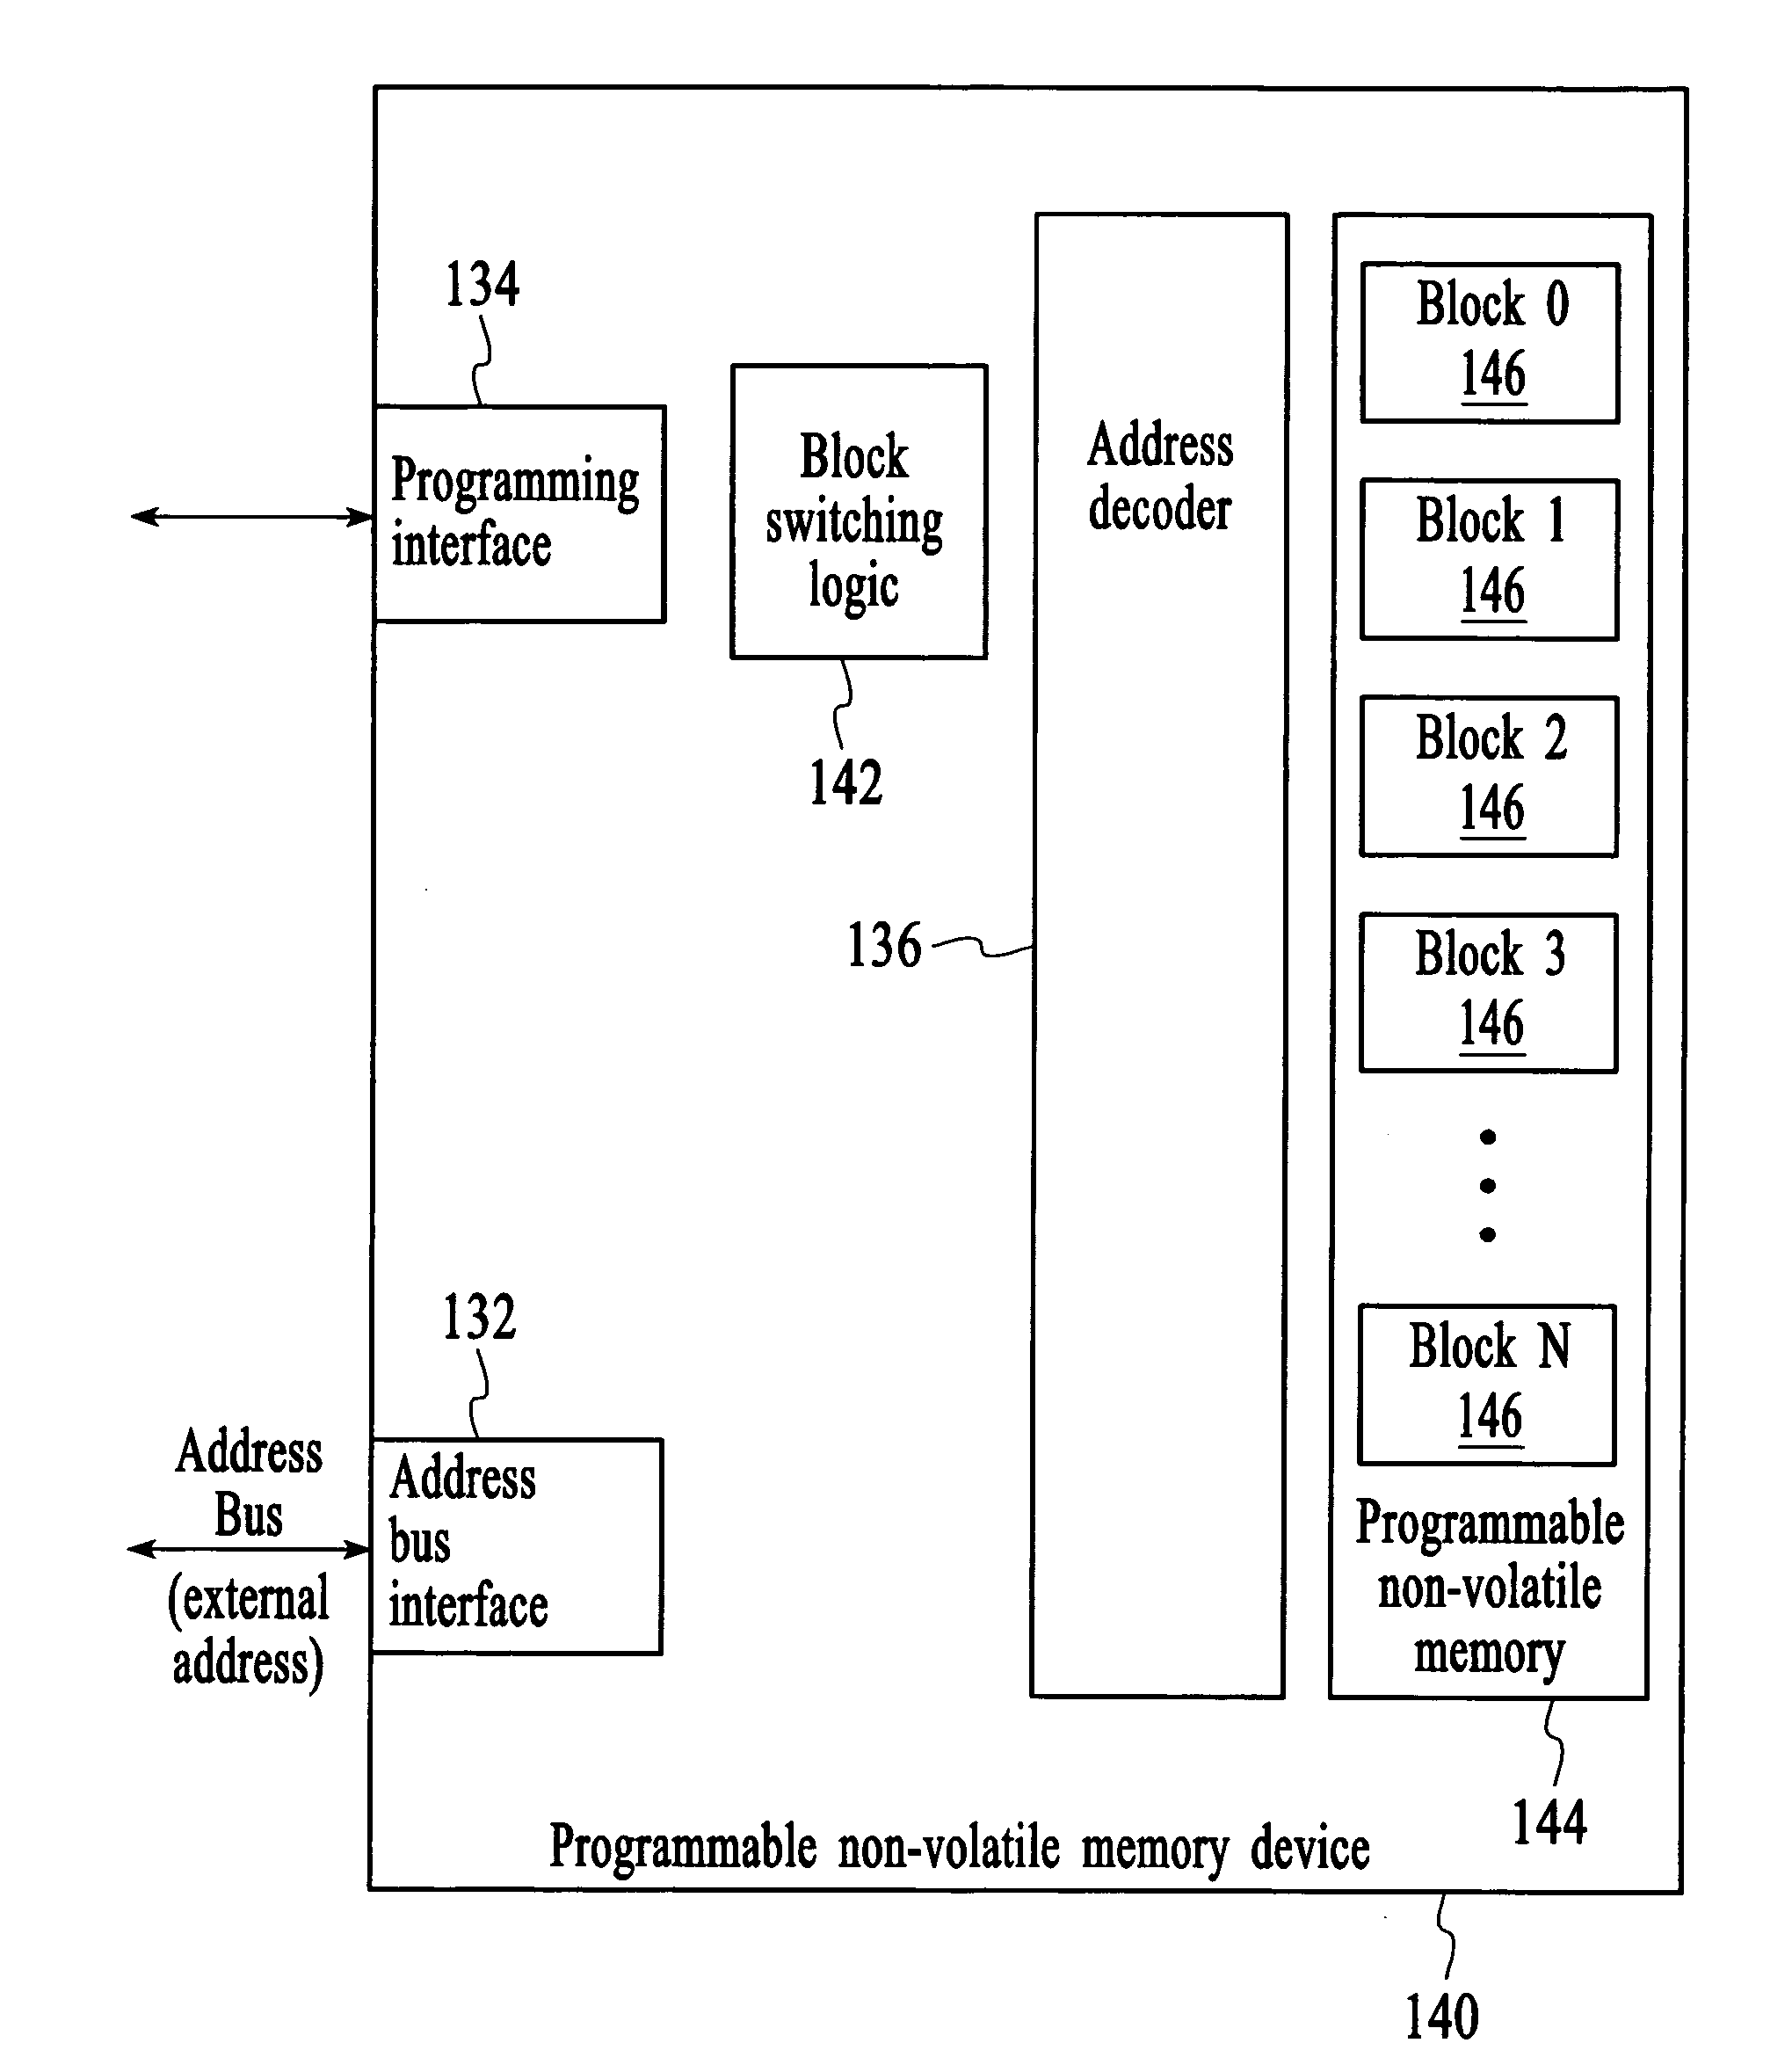 Device-level address translation within a programmable non-volatile memory device